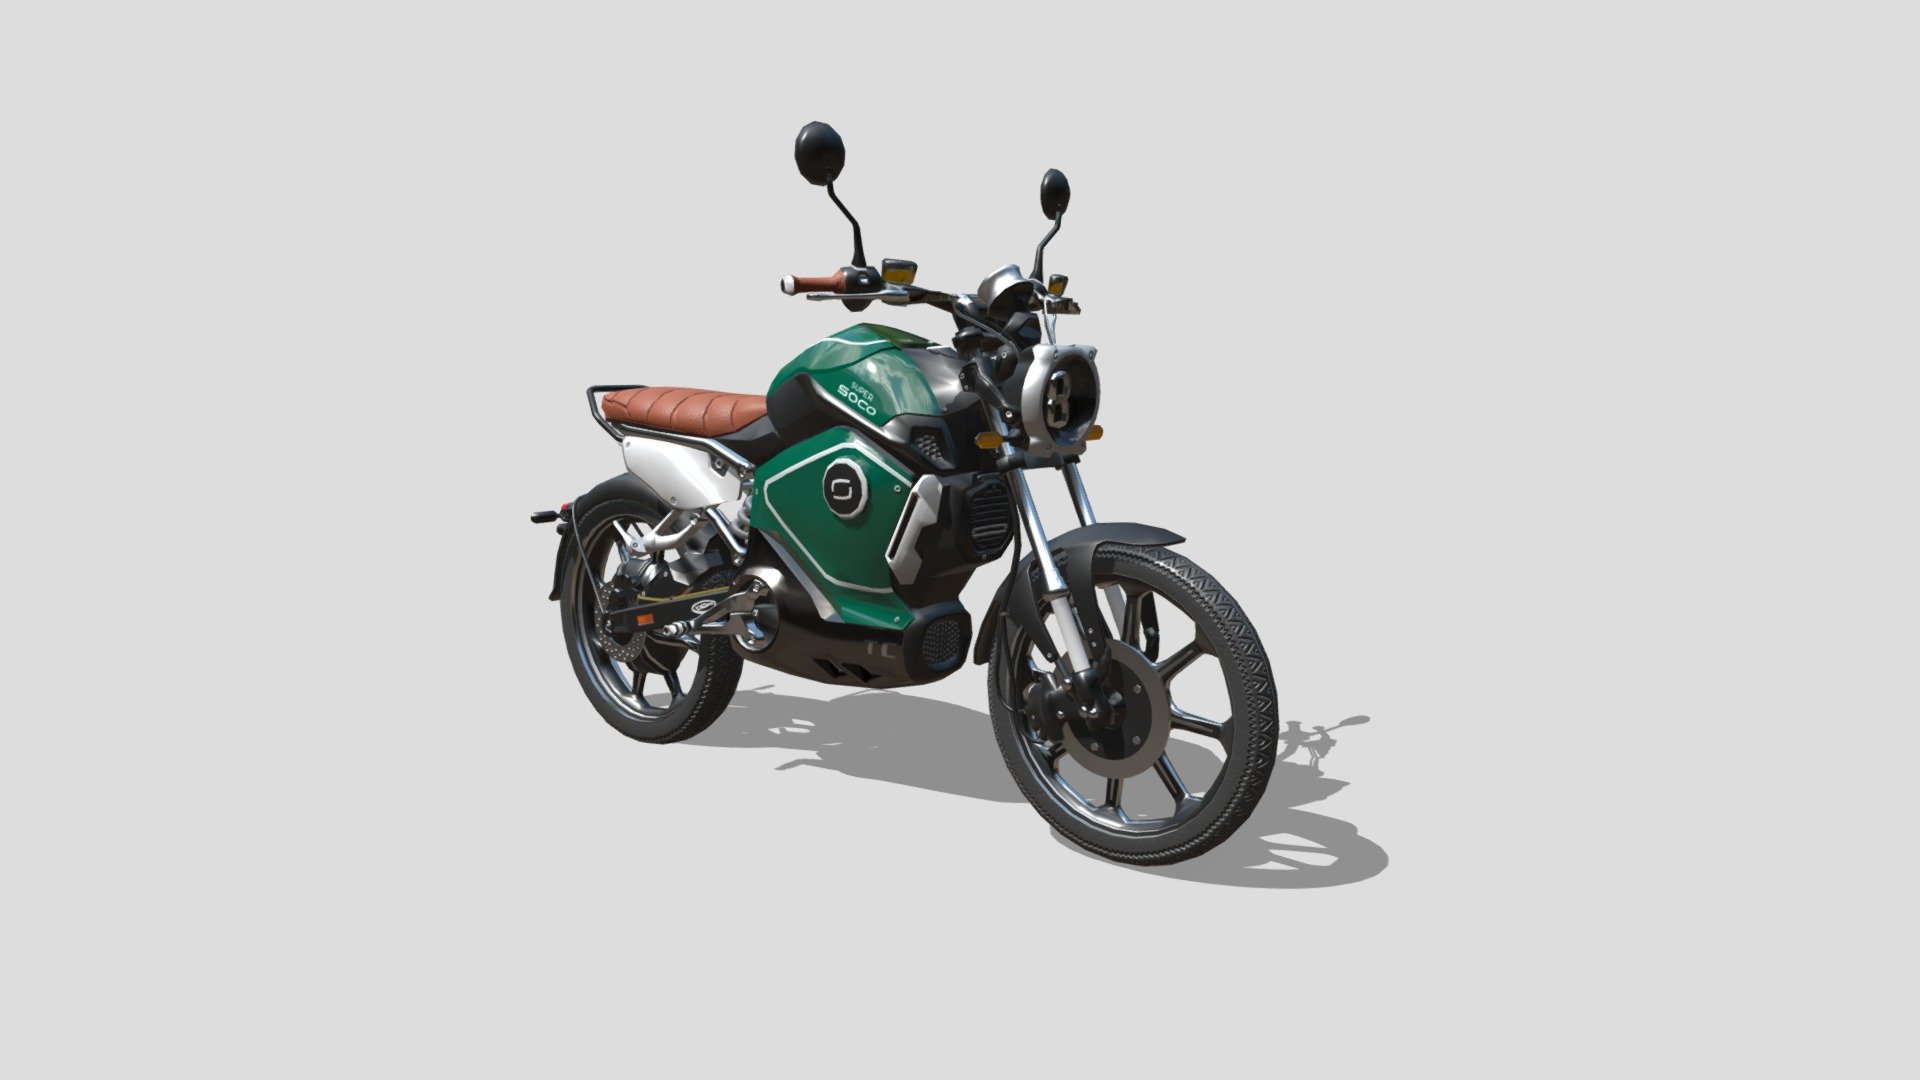 this is a retopology exercise of the soco electric motorcycle, originally made by alban
original model:
https://sketchfab.com/3d-models/super-soco-electric-motorbike-e9aa859595f543e7a80e3f4f9d1b1b48 - Super Soco electric motorbike retopologyzed - 3D model by e-restrepo1114 (@EmanuelRestrepoVelez) 3d model